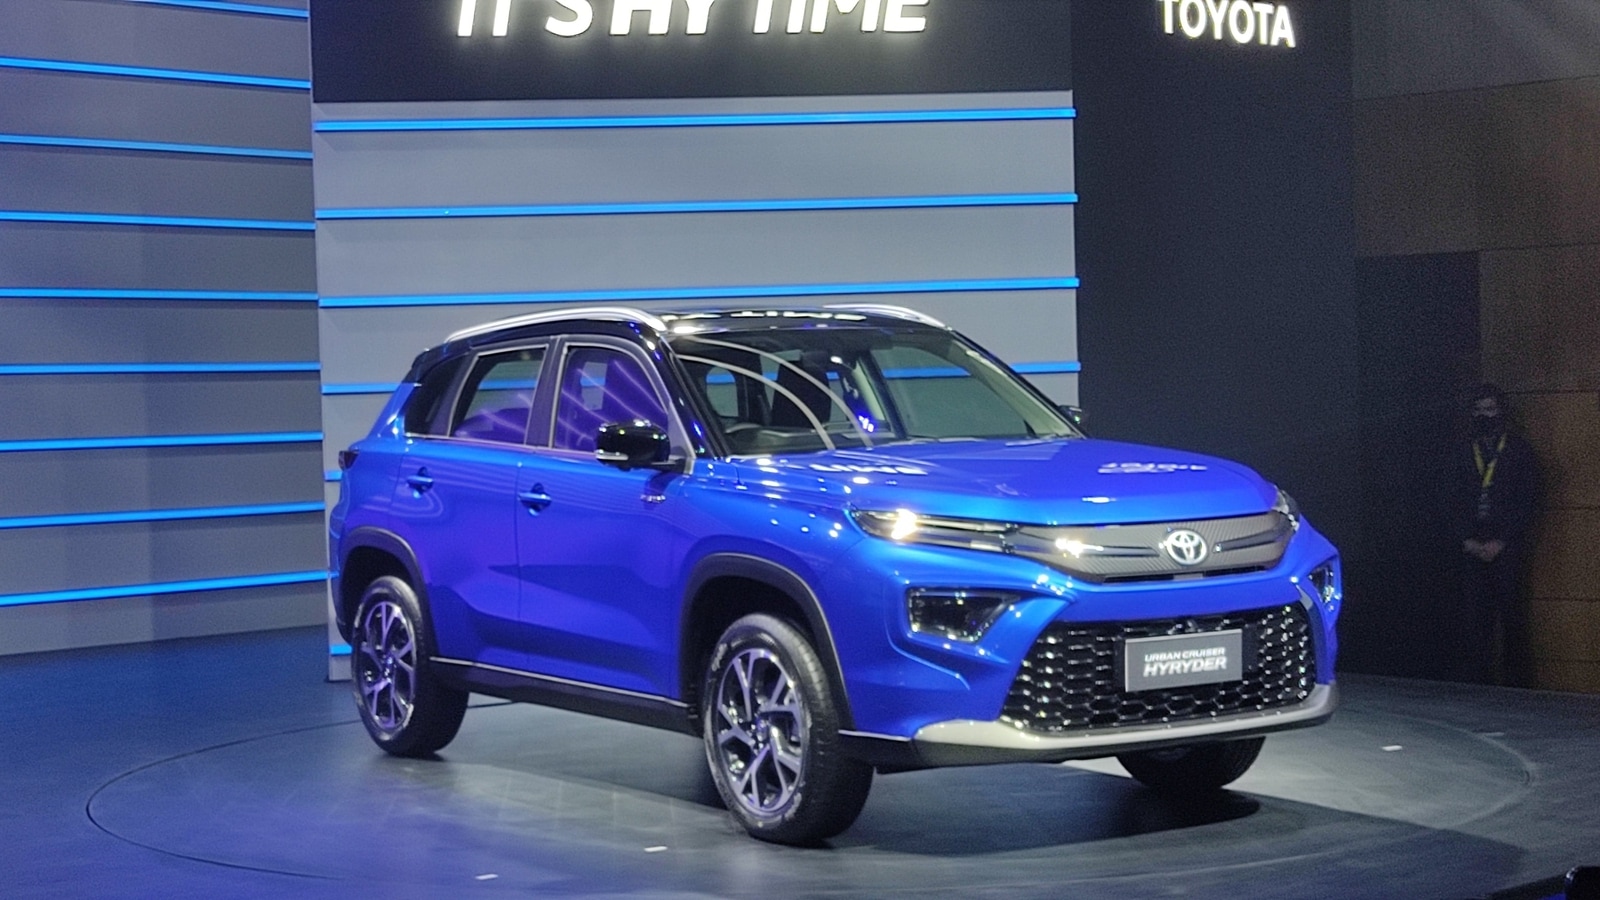 This Toyota midsize SUV emerges as a hot favourite for car buyers